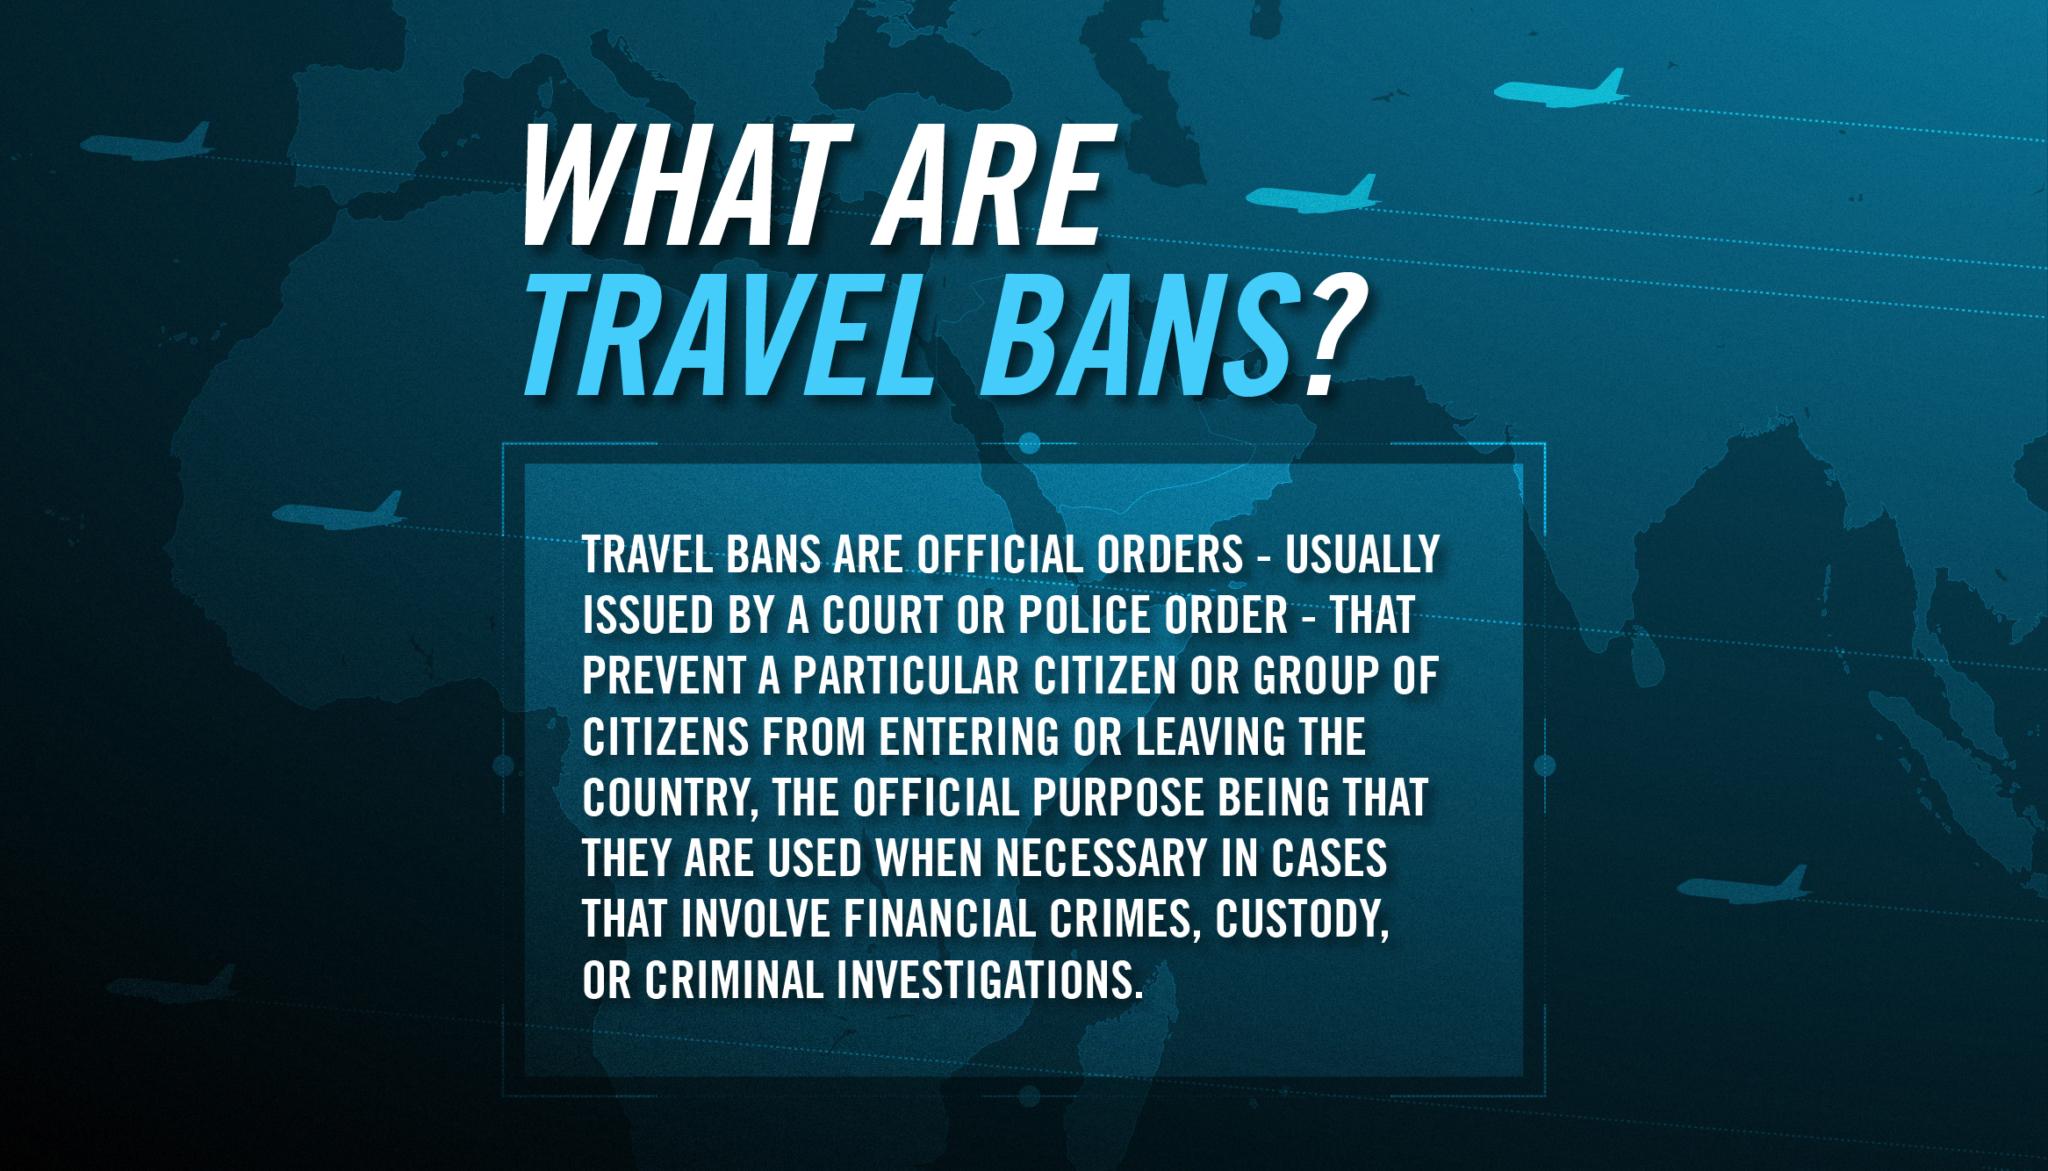 You can't leave and we won't tell you why travel bans in Saudi Arabia